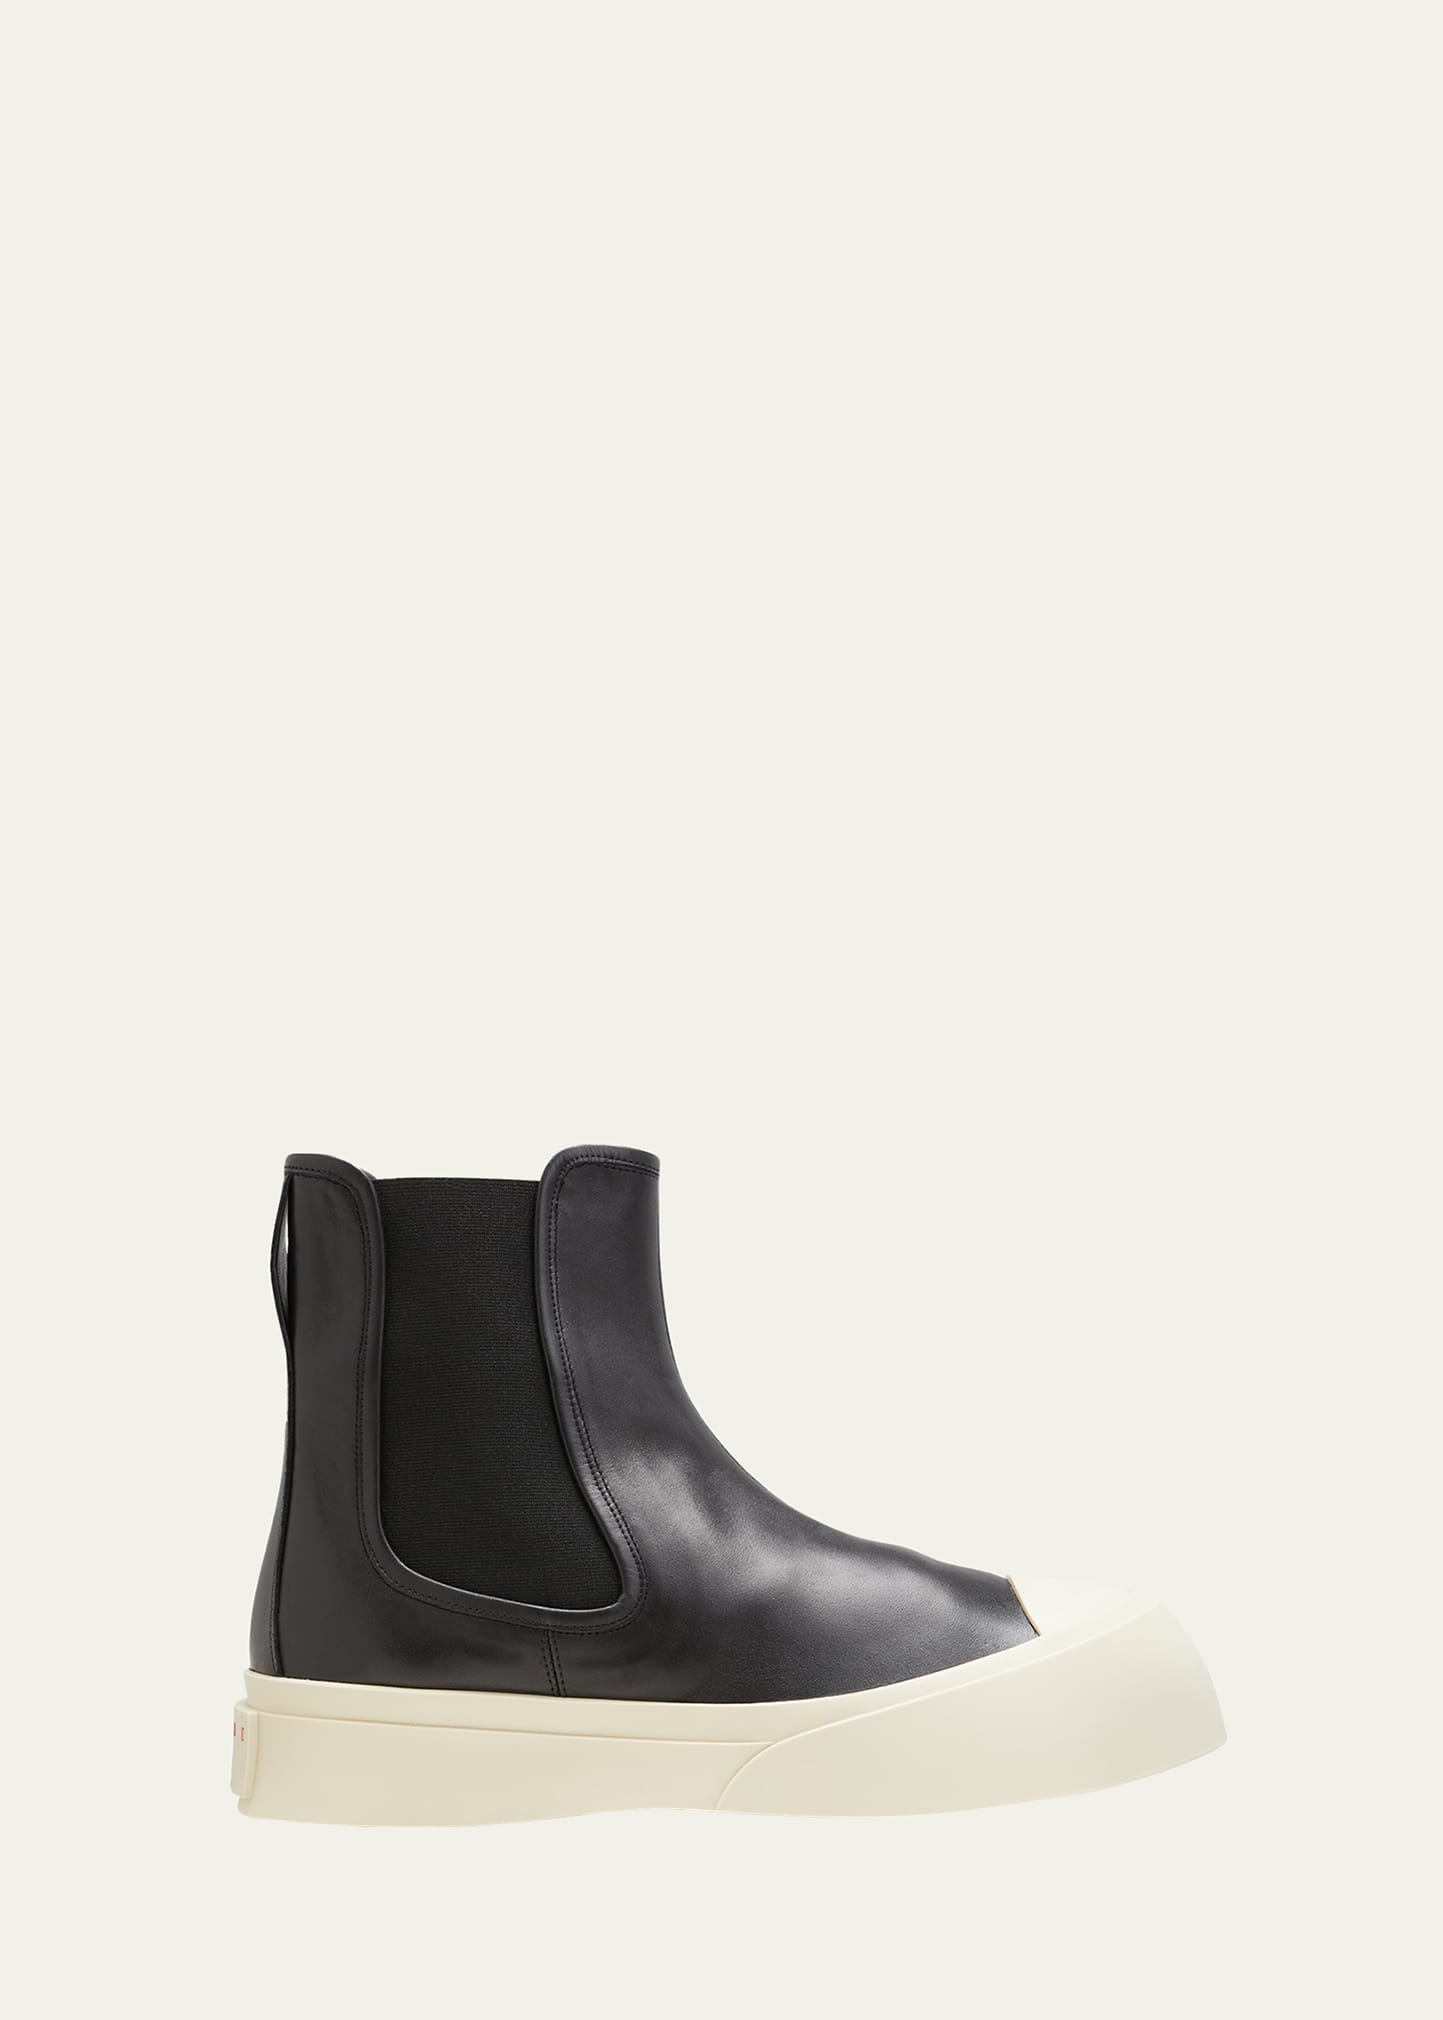 Marni Men's Chunky-Sole Leather Chelsea Boots